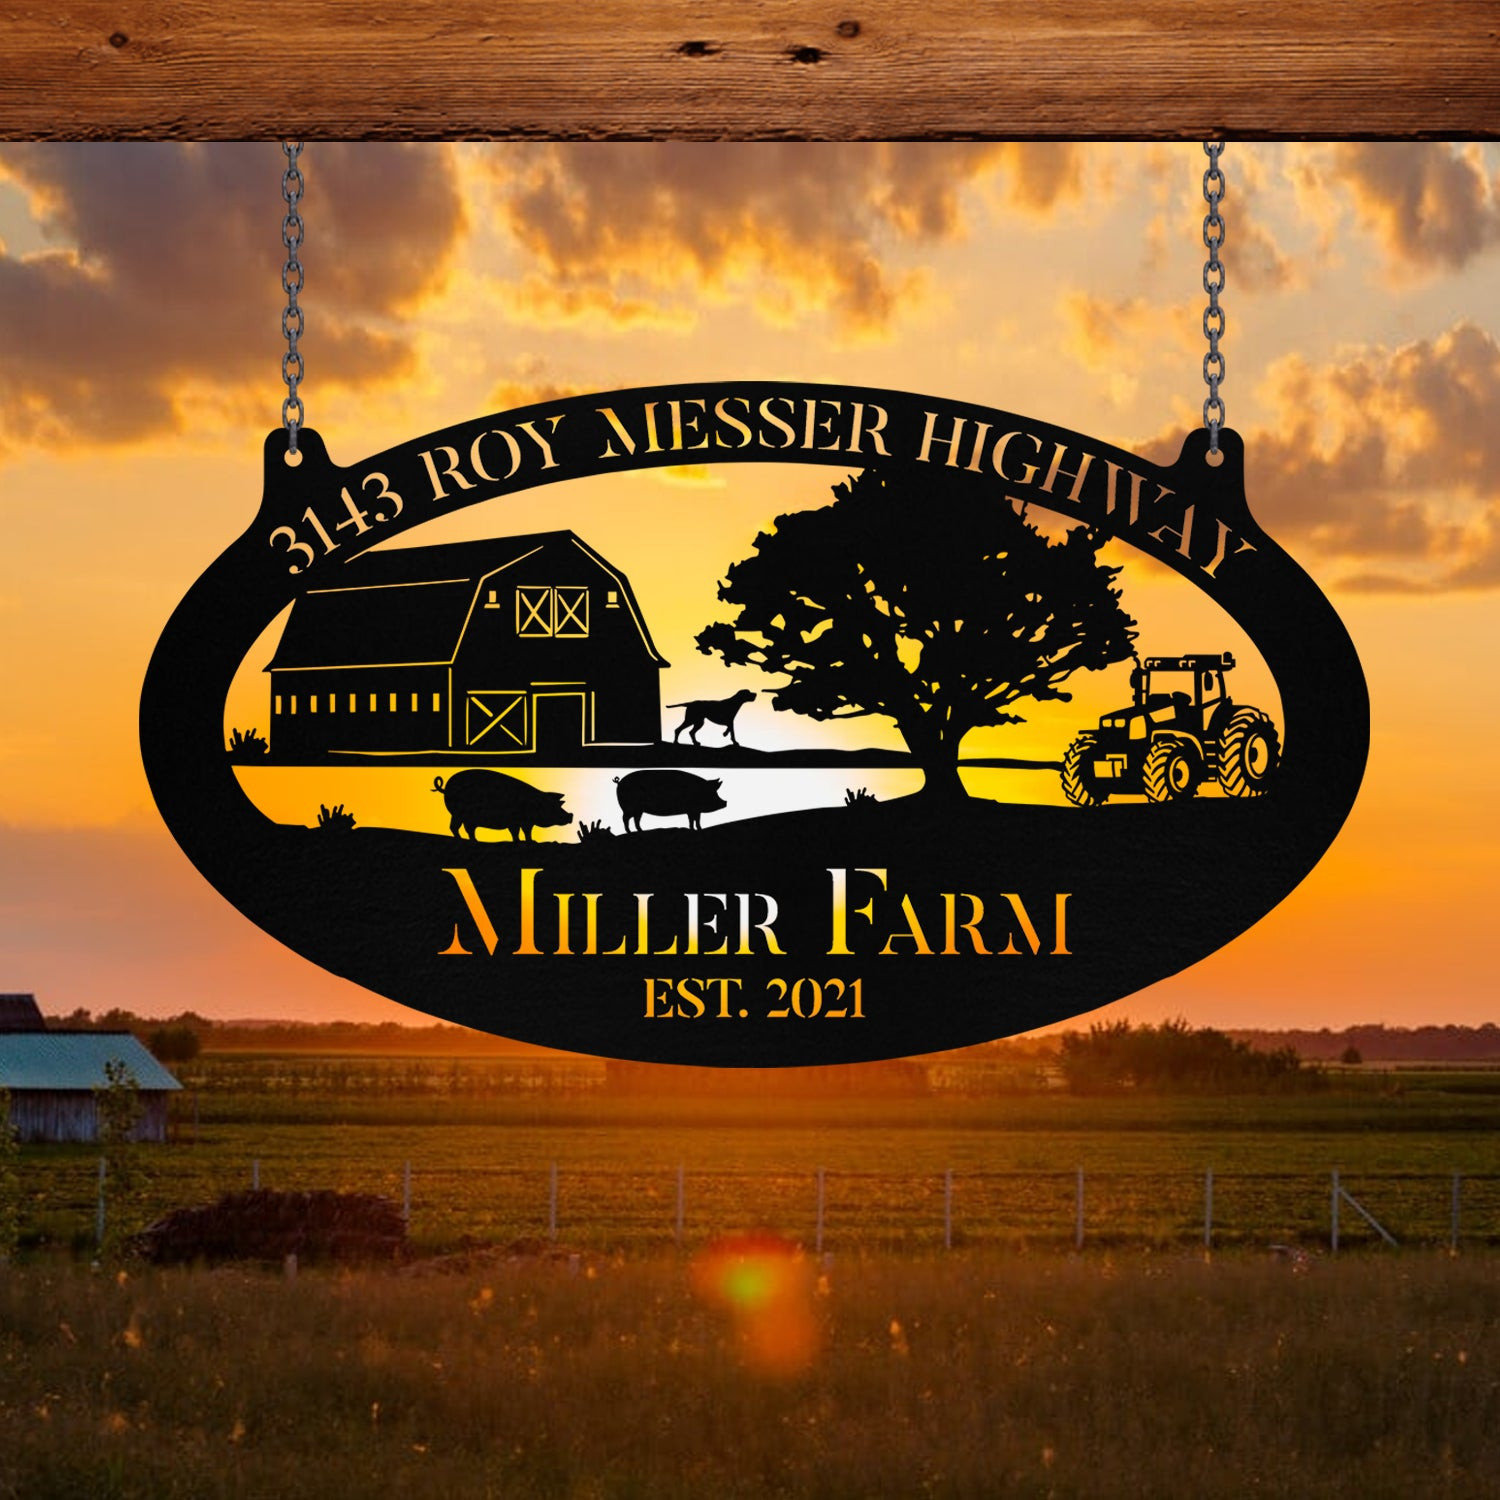 Personalized Metal Farm Sign Barn Dog Pig Tractor, Metal Laser Cut Metal Signs Custom Gift Ideas 14x14IN